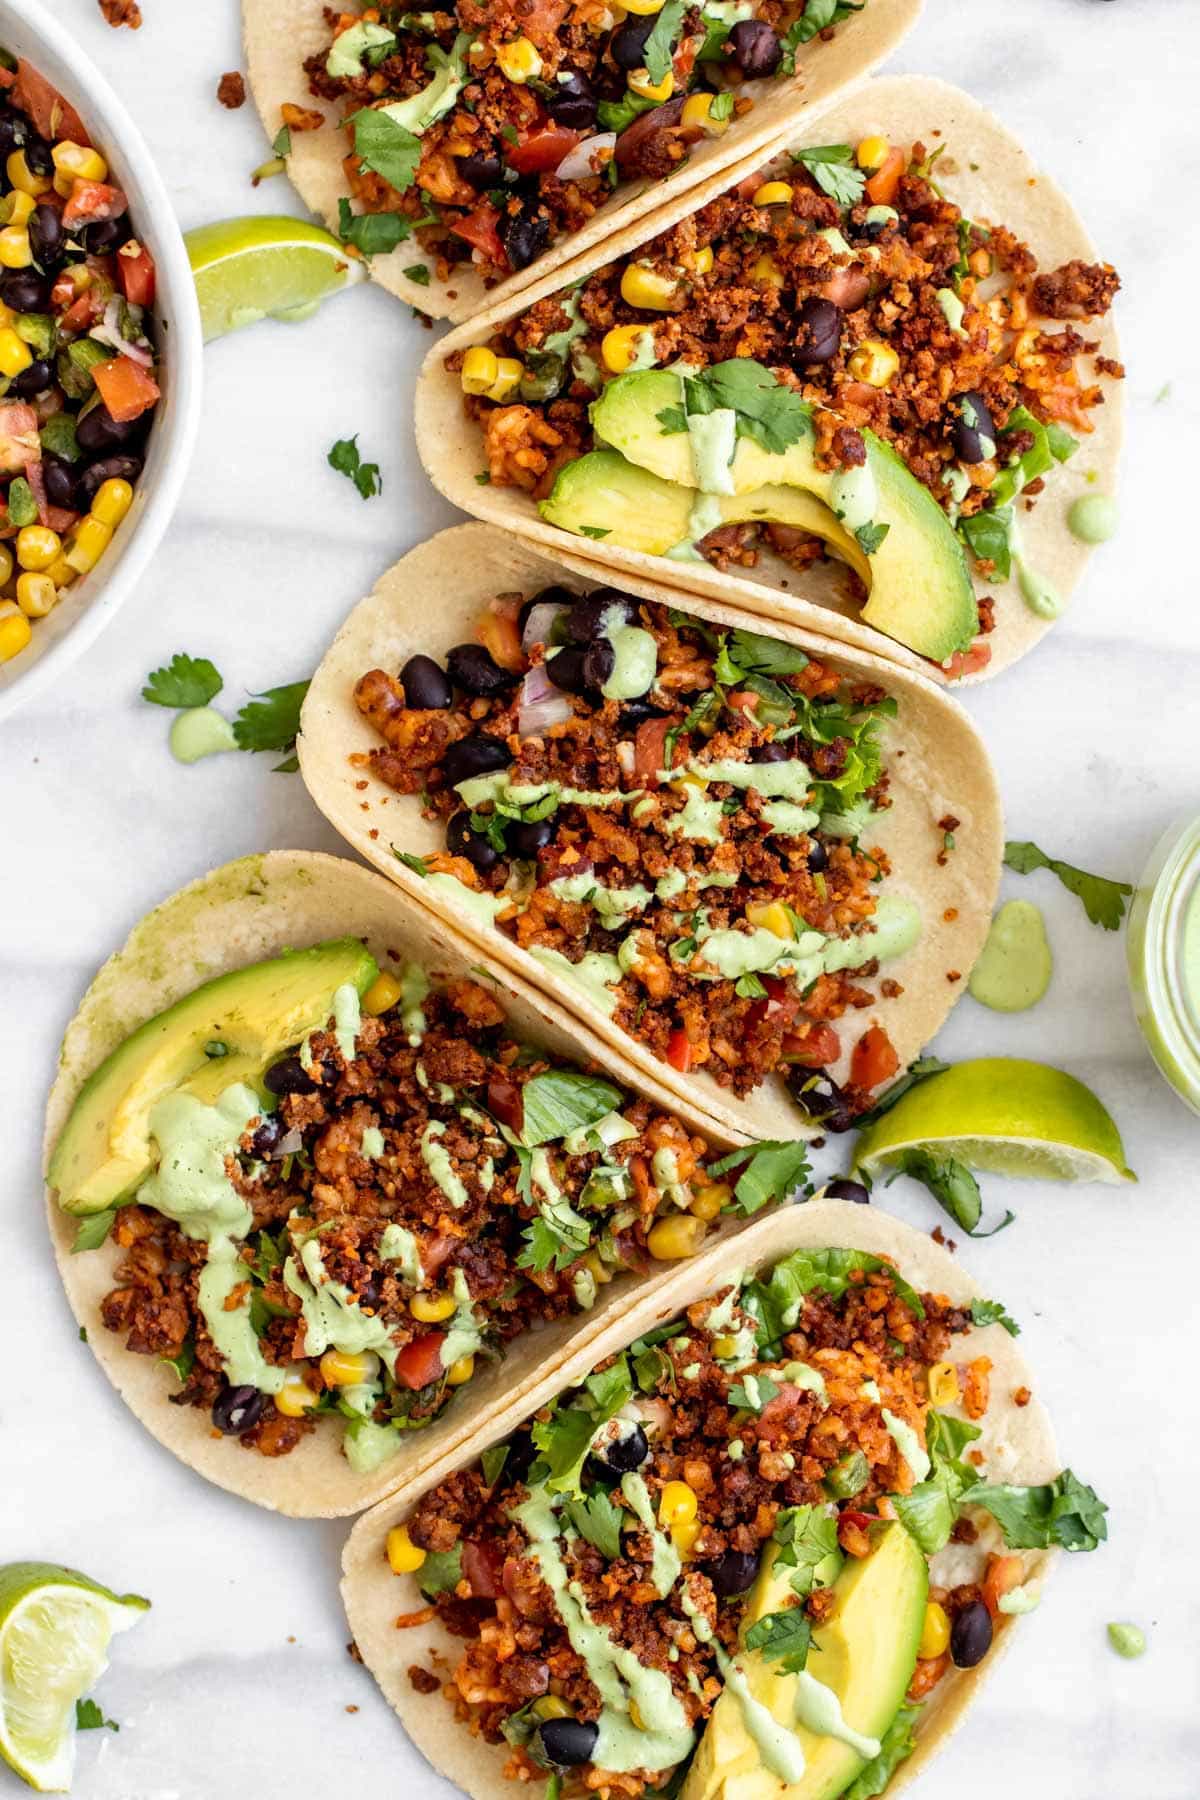 Mexican Inspired Vegan Tofu Tacos Recipe | Eat With Clarity